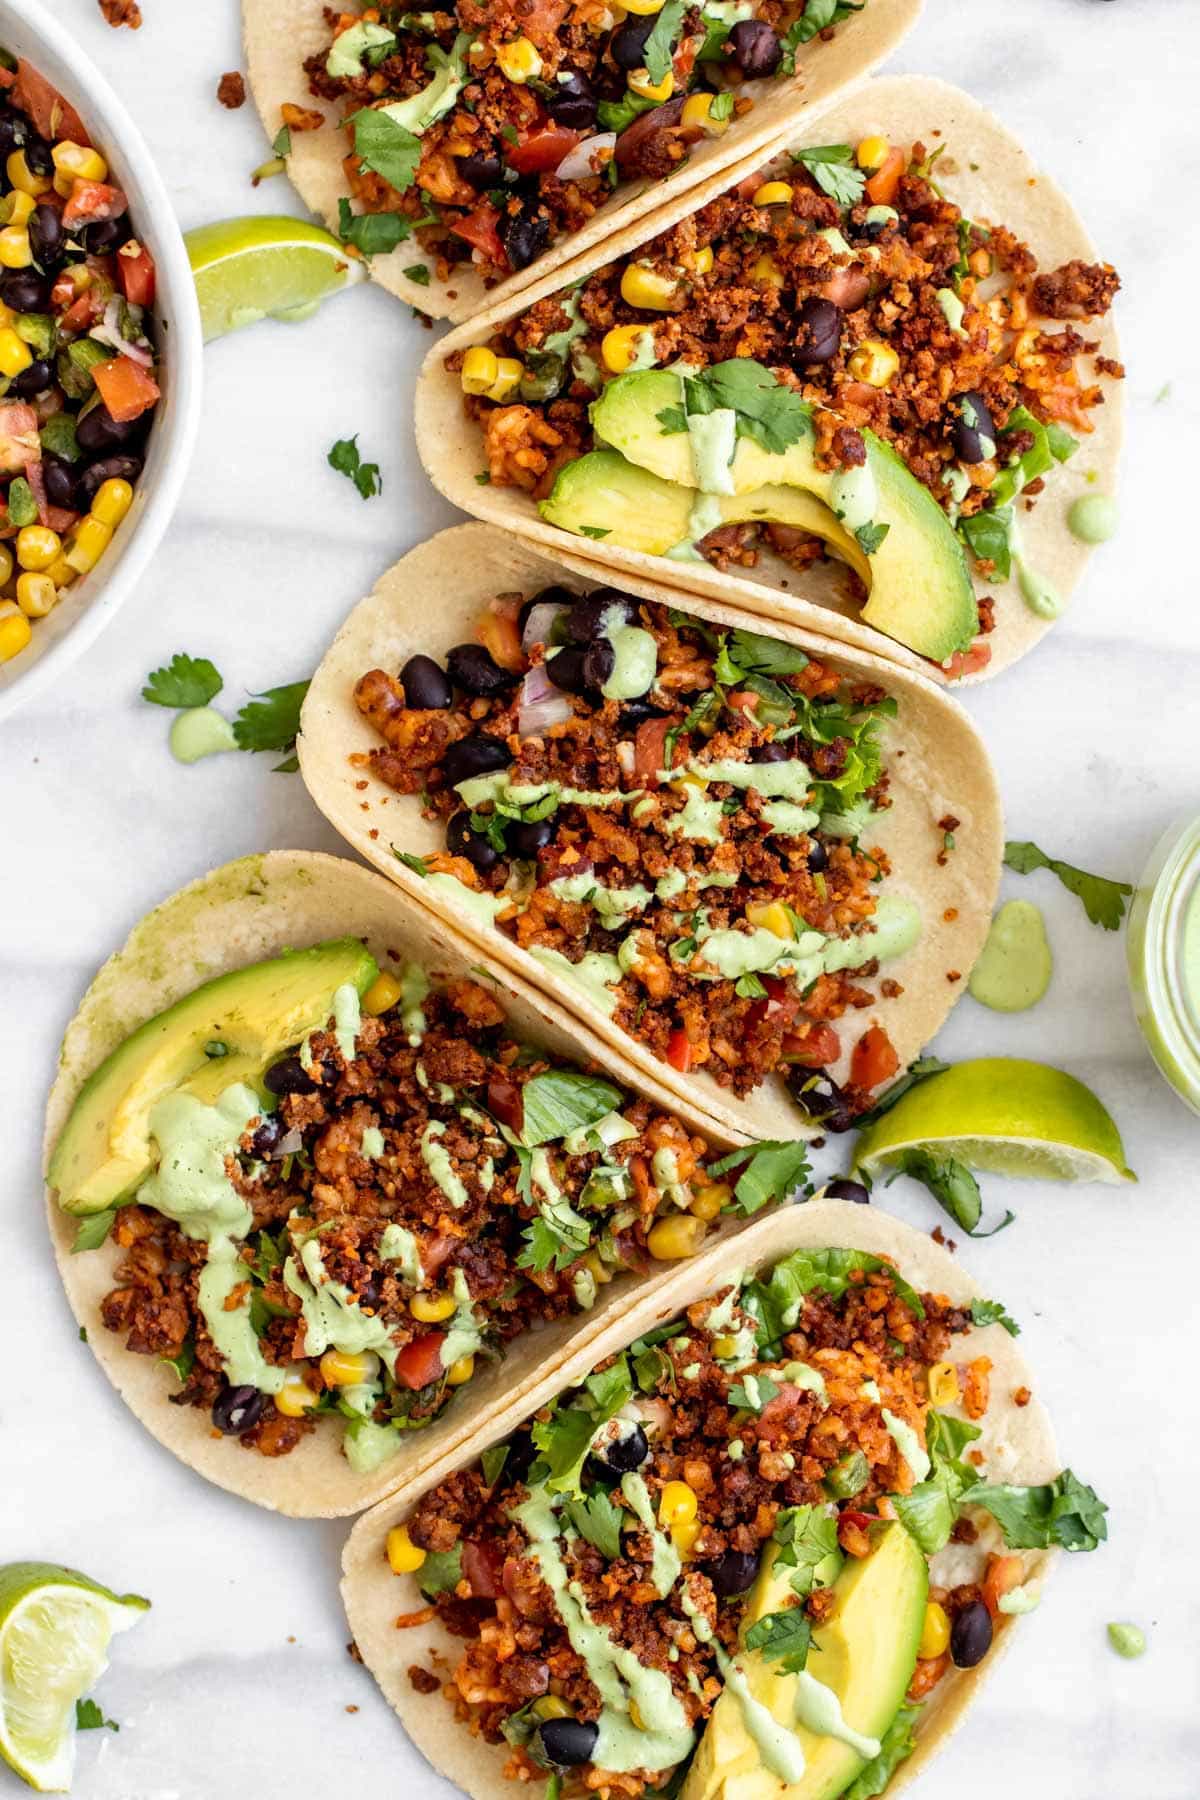 Mexican Inspired Vegan Tofu Tacos Recipe | Eat With Clarity